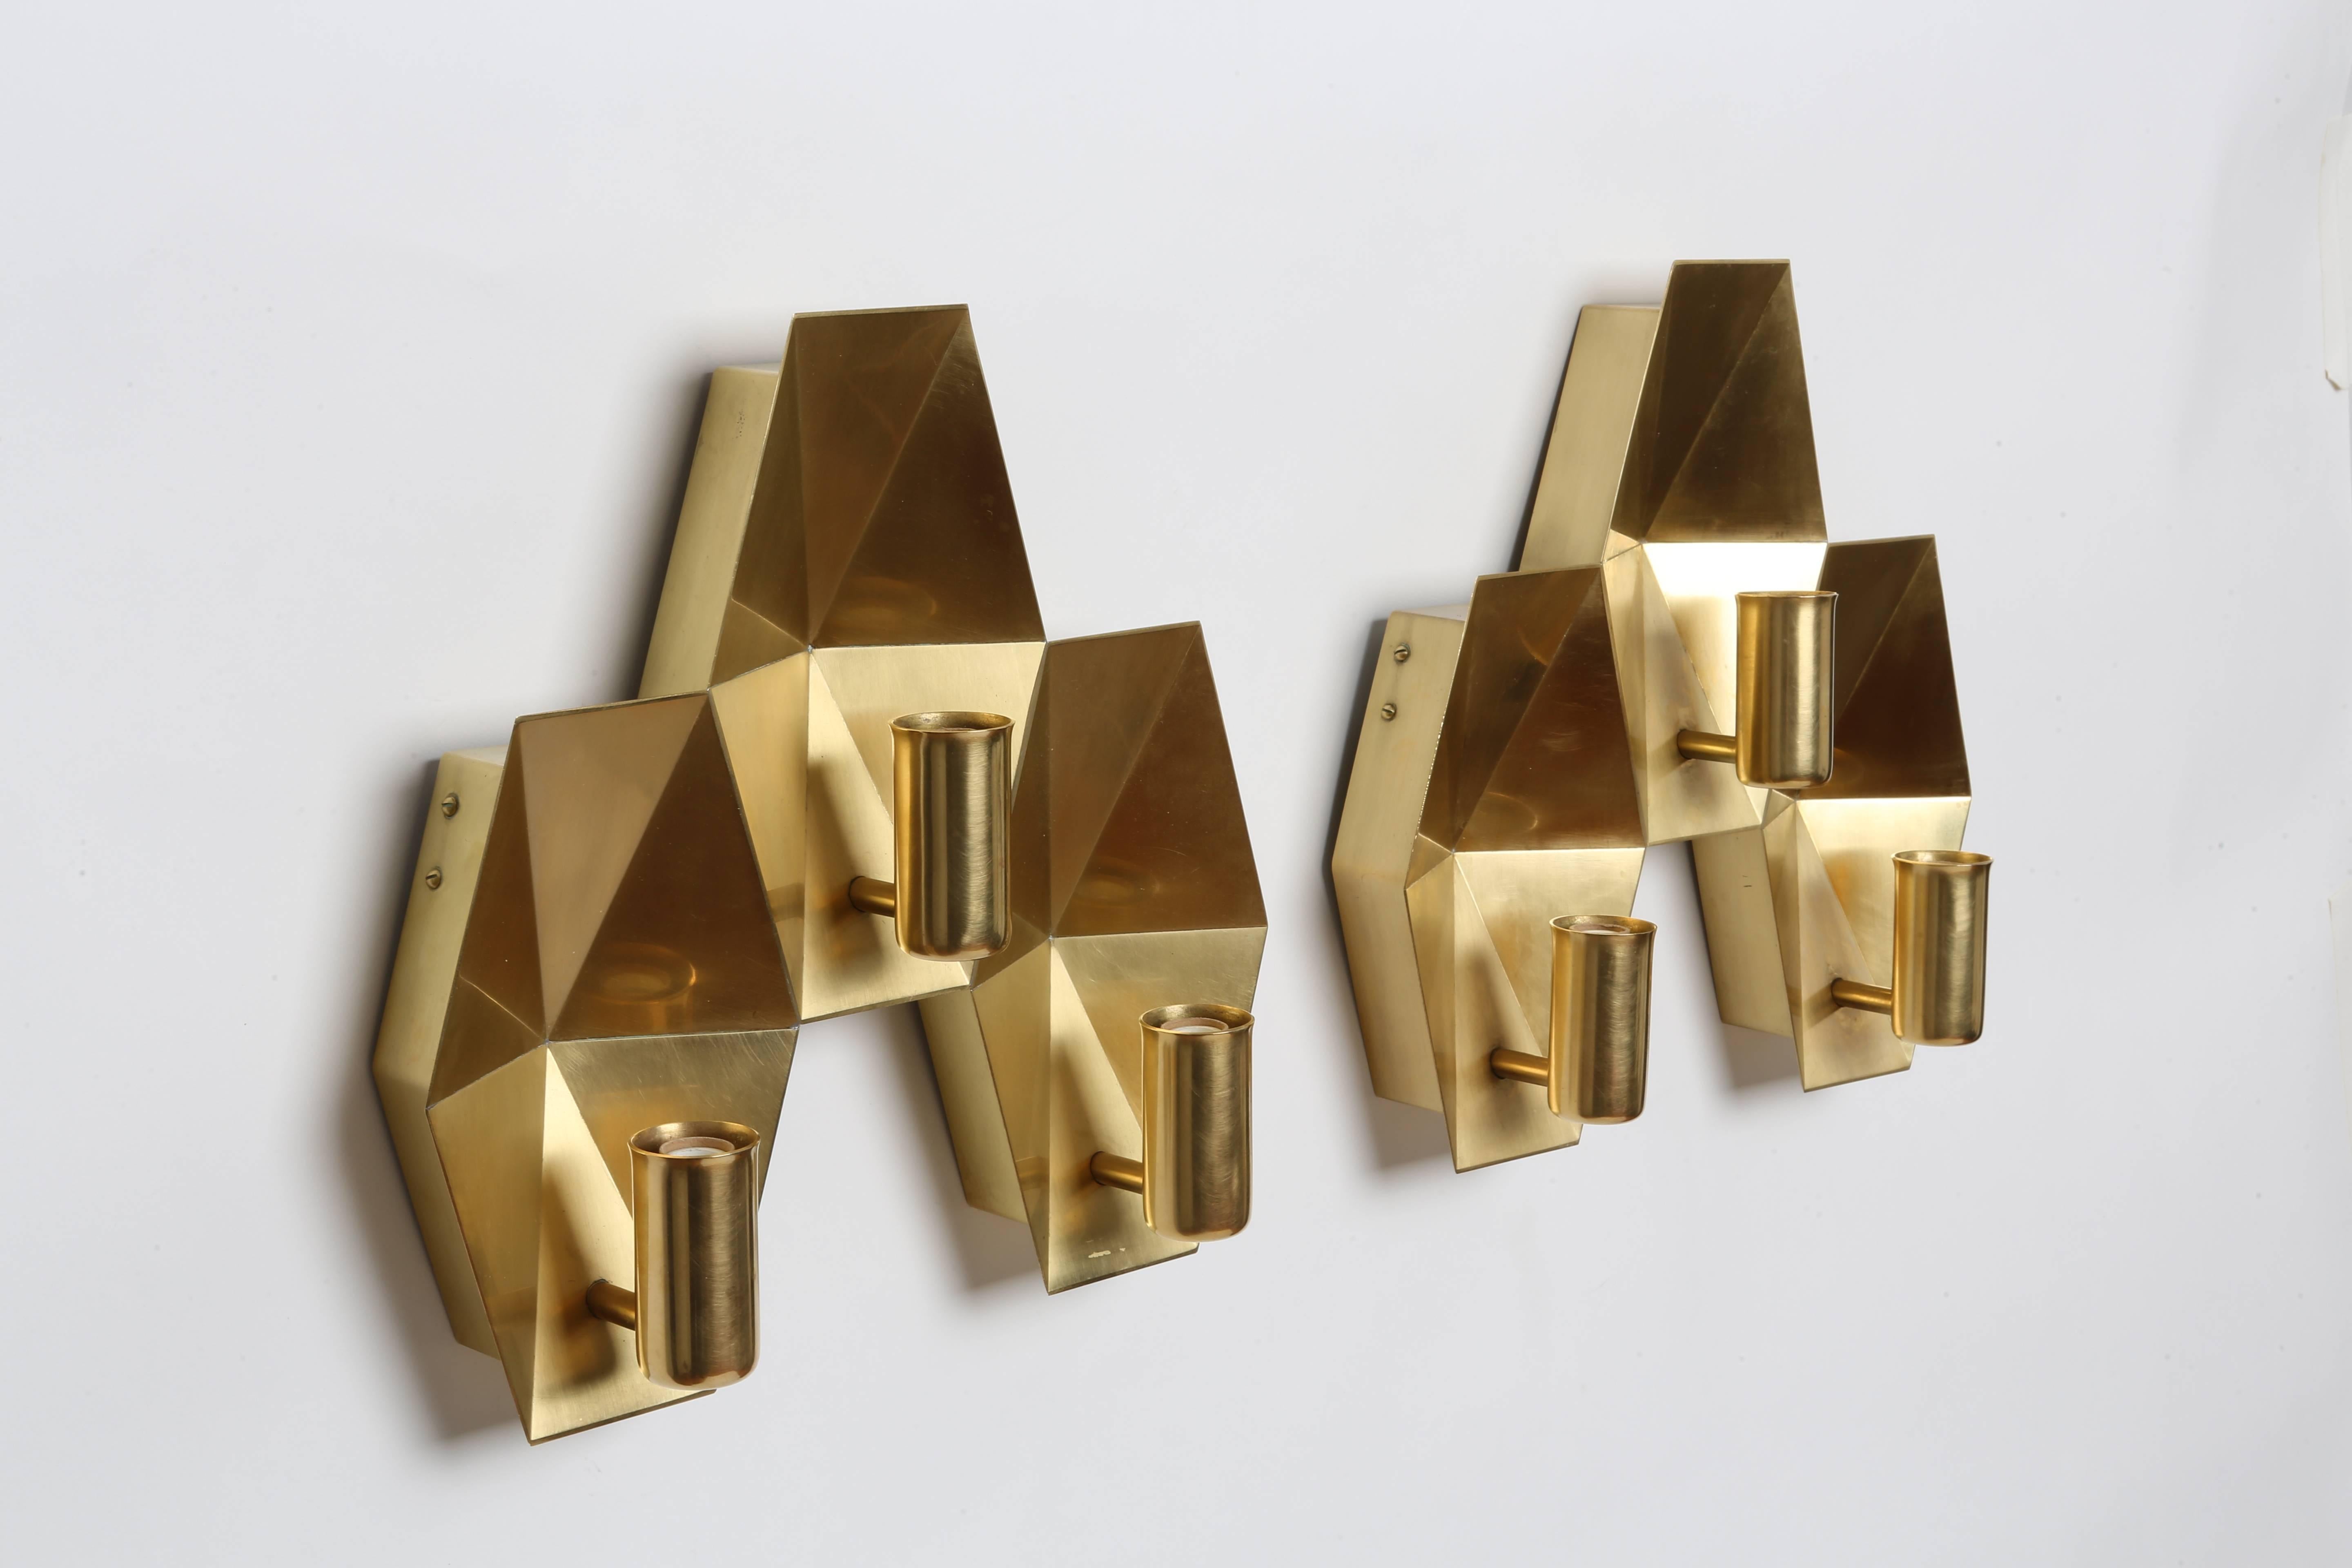 Fog & Morup brass wall lamps. 
Three candelabra sockets each. Made with solid brass.
Denmark, 1960s.